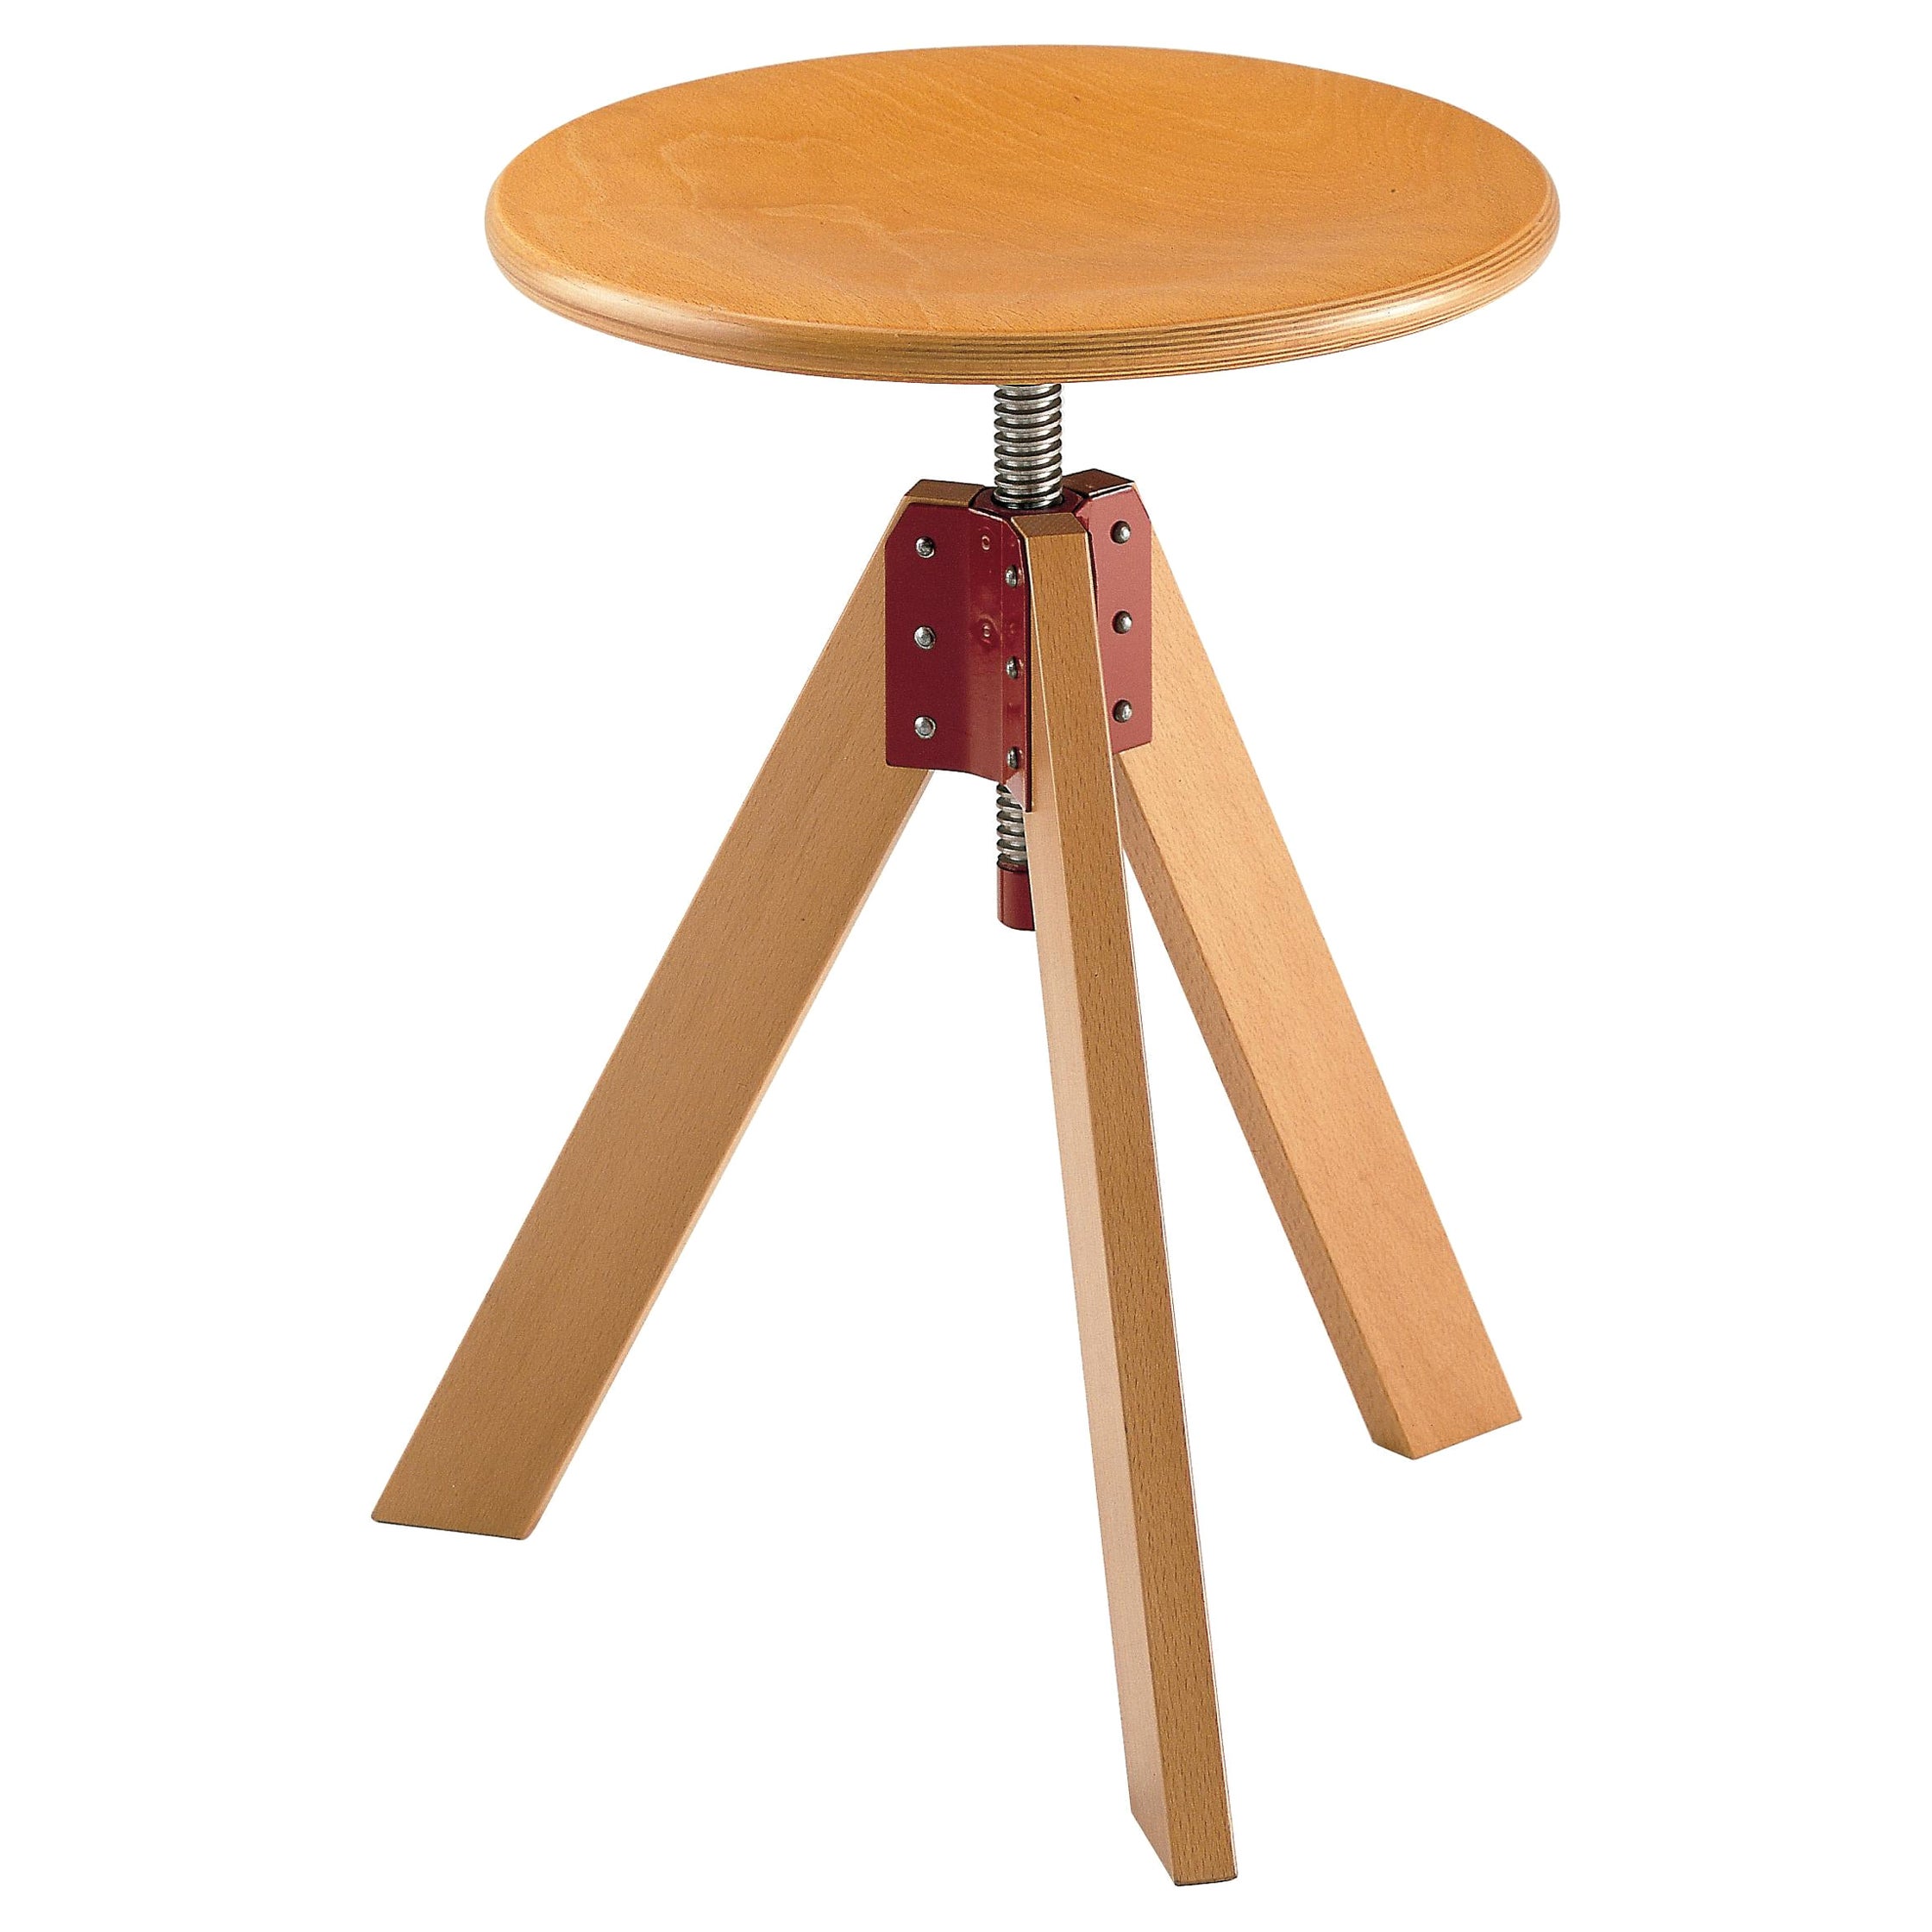 Zanotta Giotto Stool in Natural Varnished Beech Frame with Red Bracket For Sale